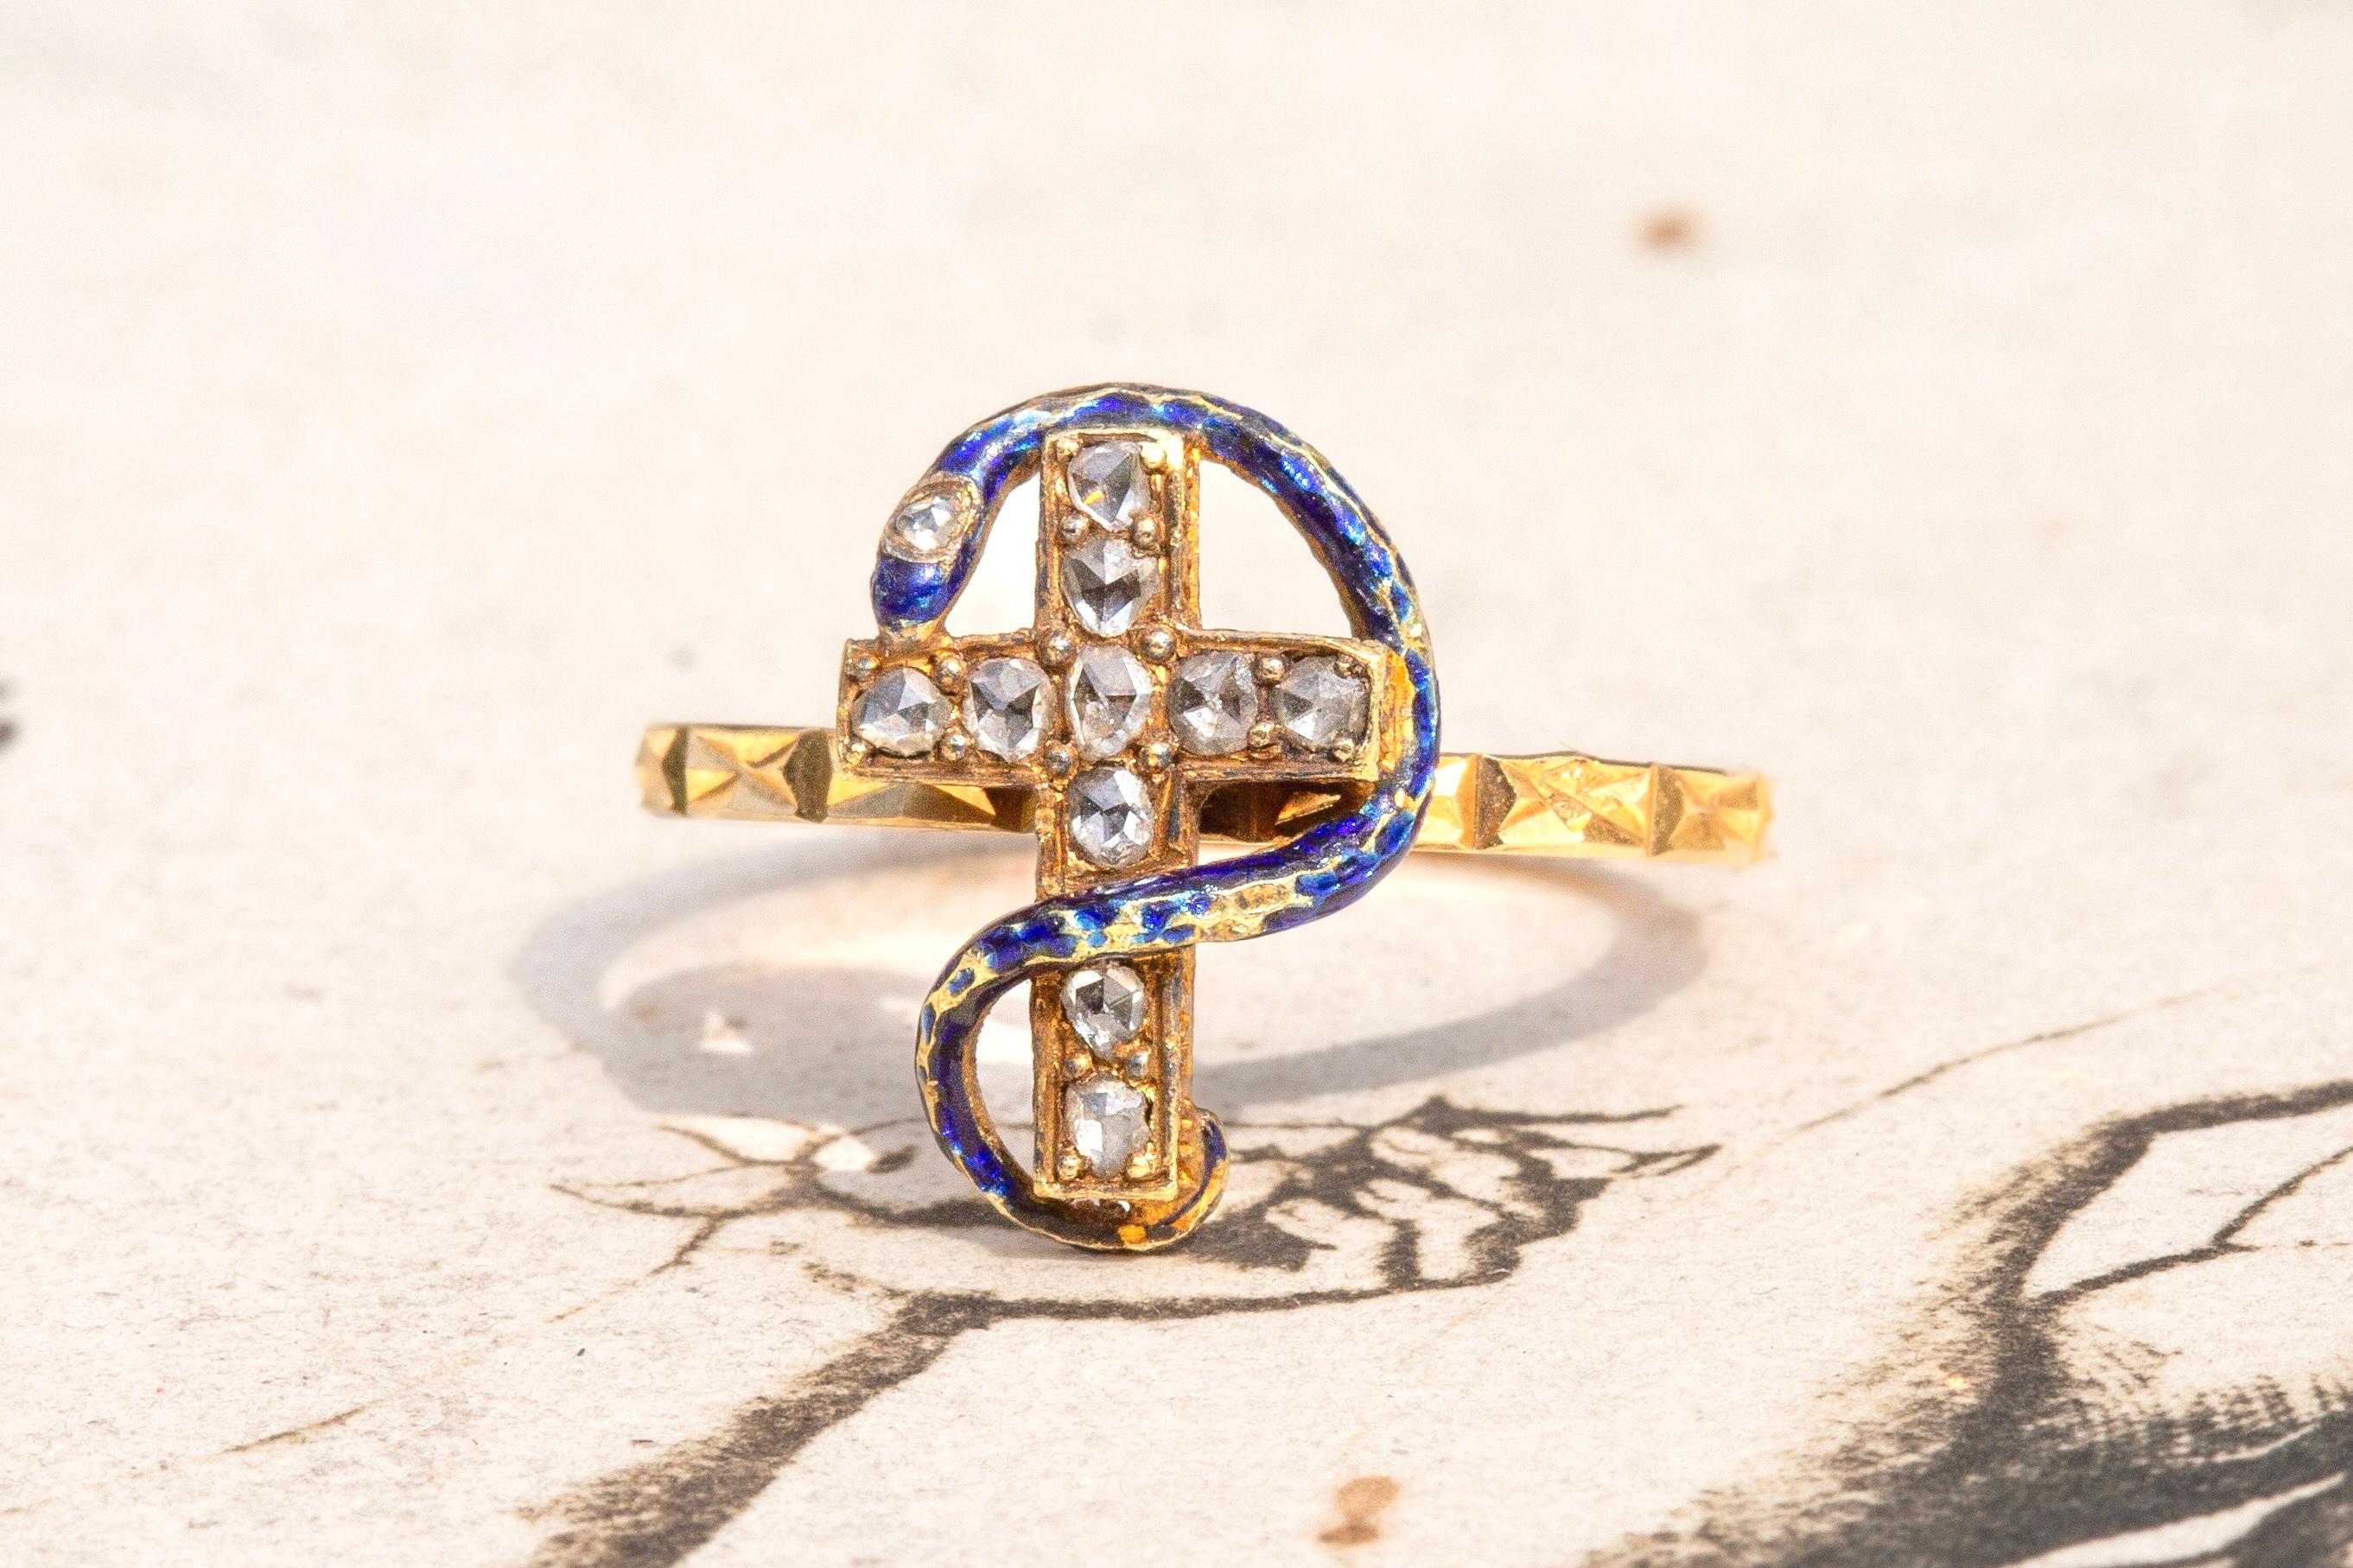 A wonderful antique enamelled snake and cross ring. This piece probably started life as a stickpin dating to the second half of the 19th century, circa 1870 and was later been converted into a ring. It is crafted in 18K yellow gold and the serpent's